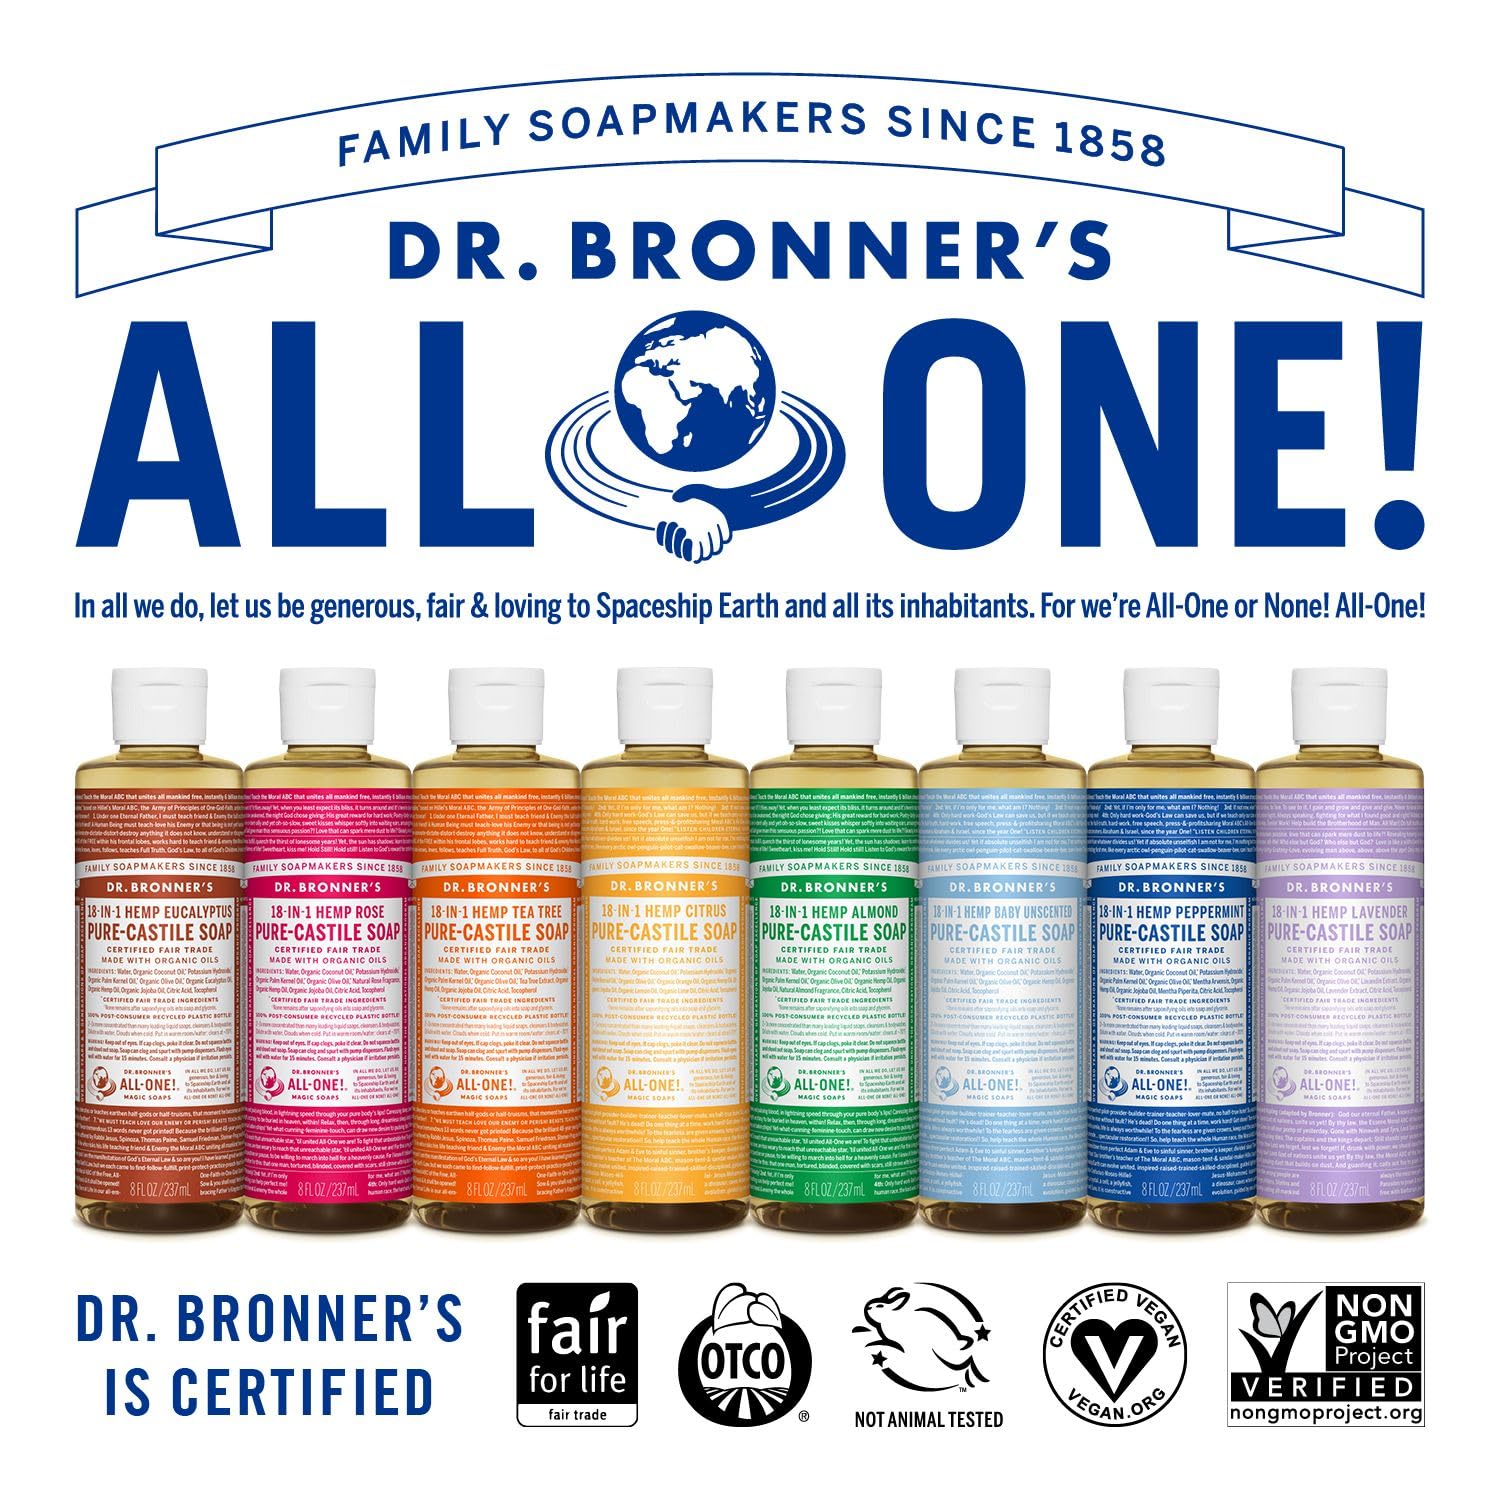 Dr. Bronner's - Pure-Castile Liquid Soap (Lavender, 8 ounce) - Made with Organic Oils, 18-in-1 Uses: Face, Body, Hair, Laundry, Pets and Dishes, Concentrated, Vegan, Non-GMO